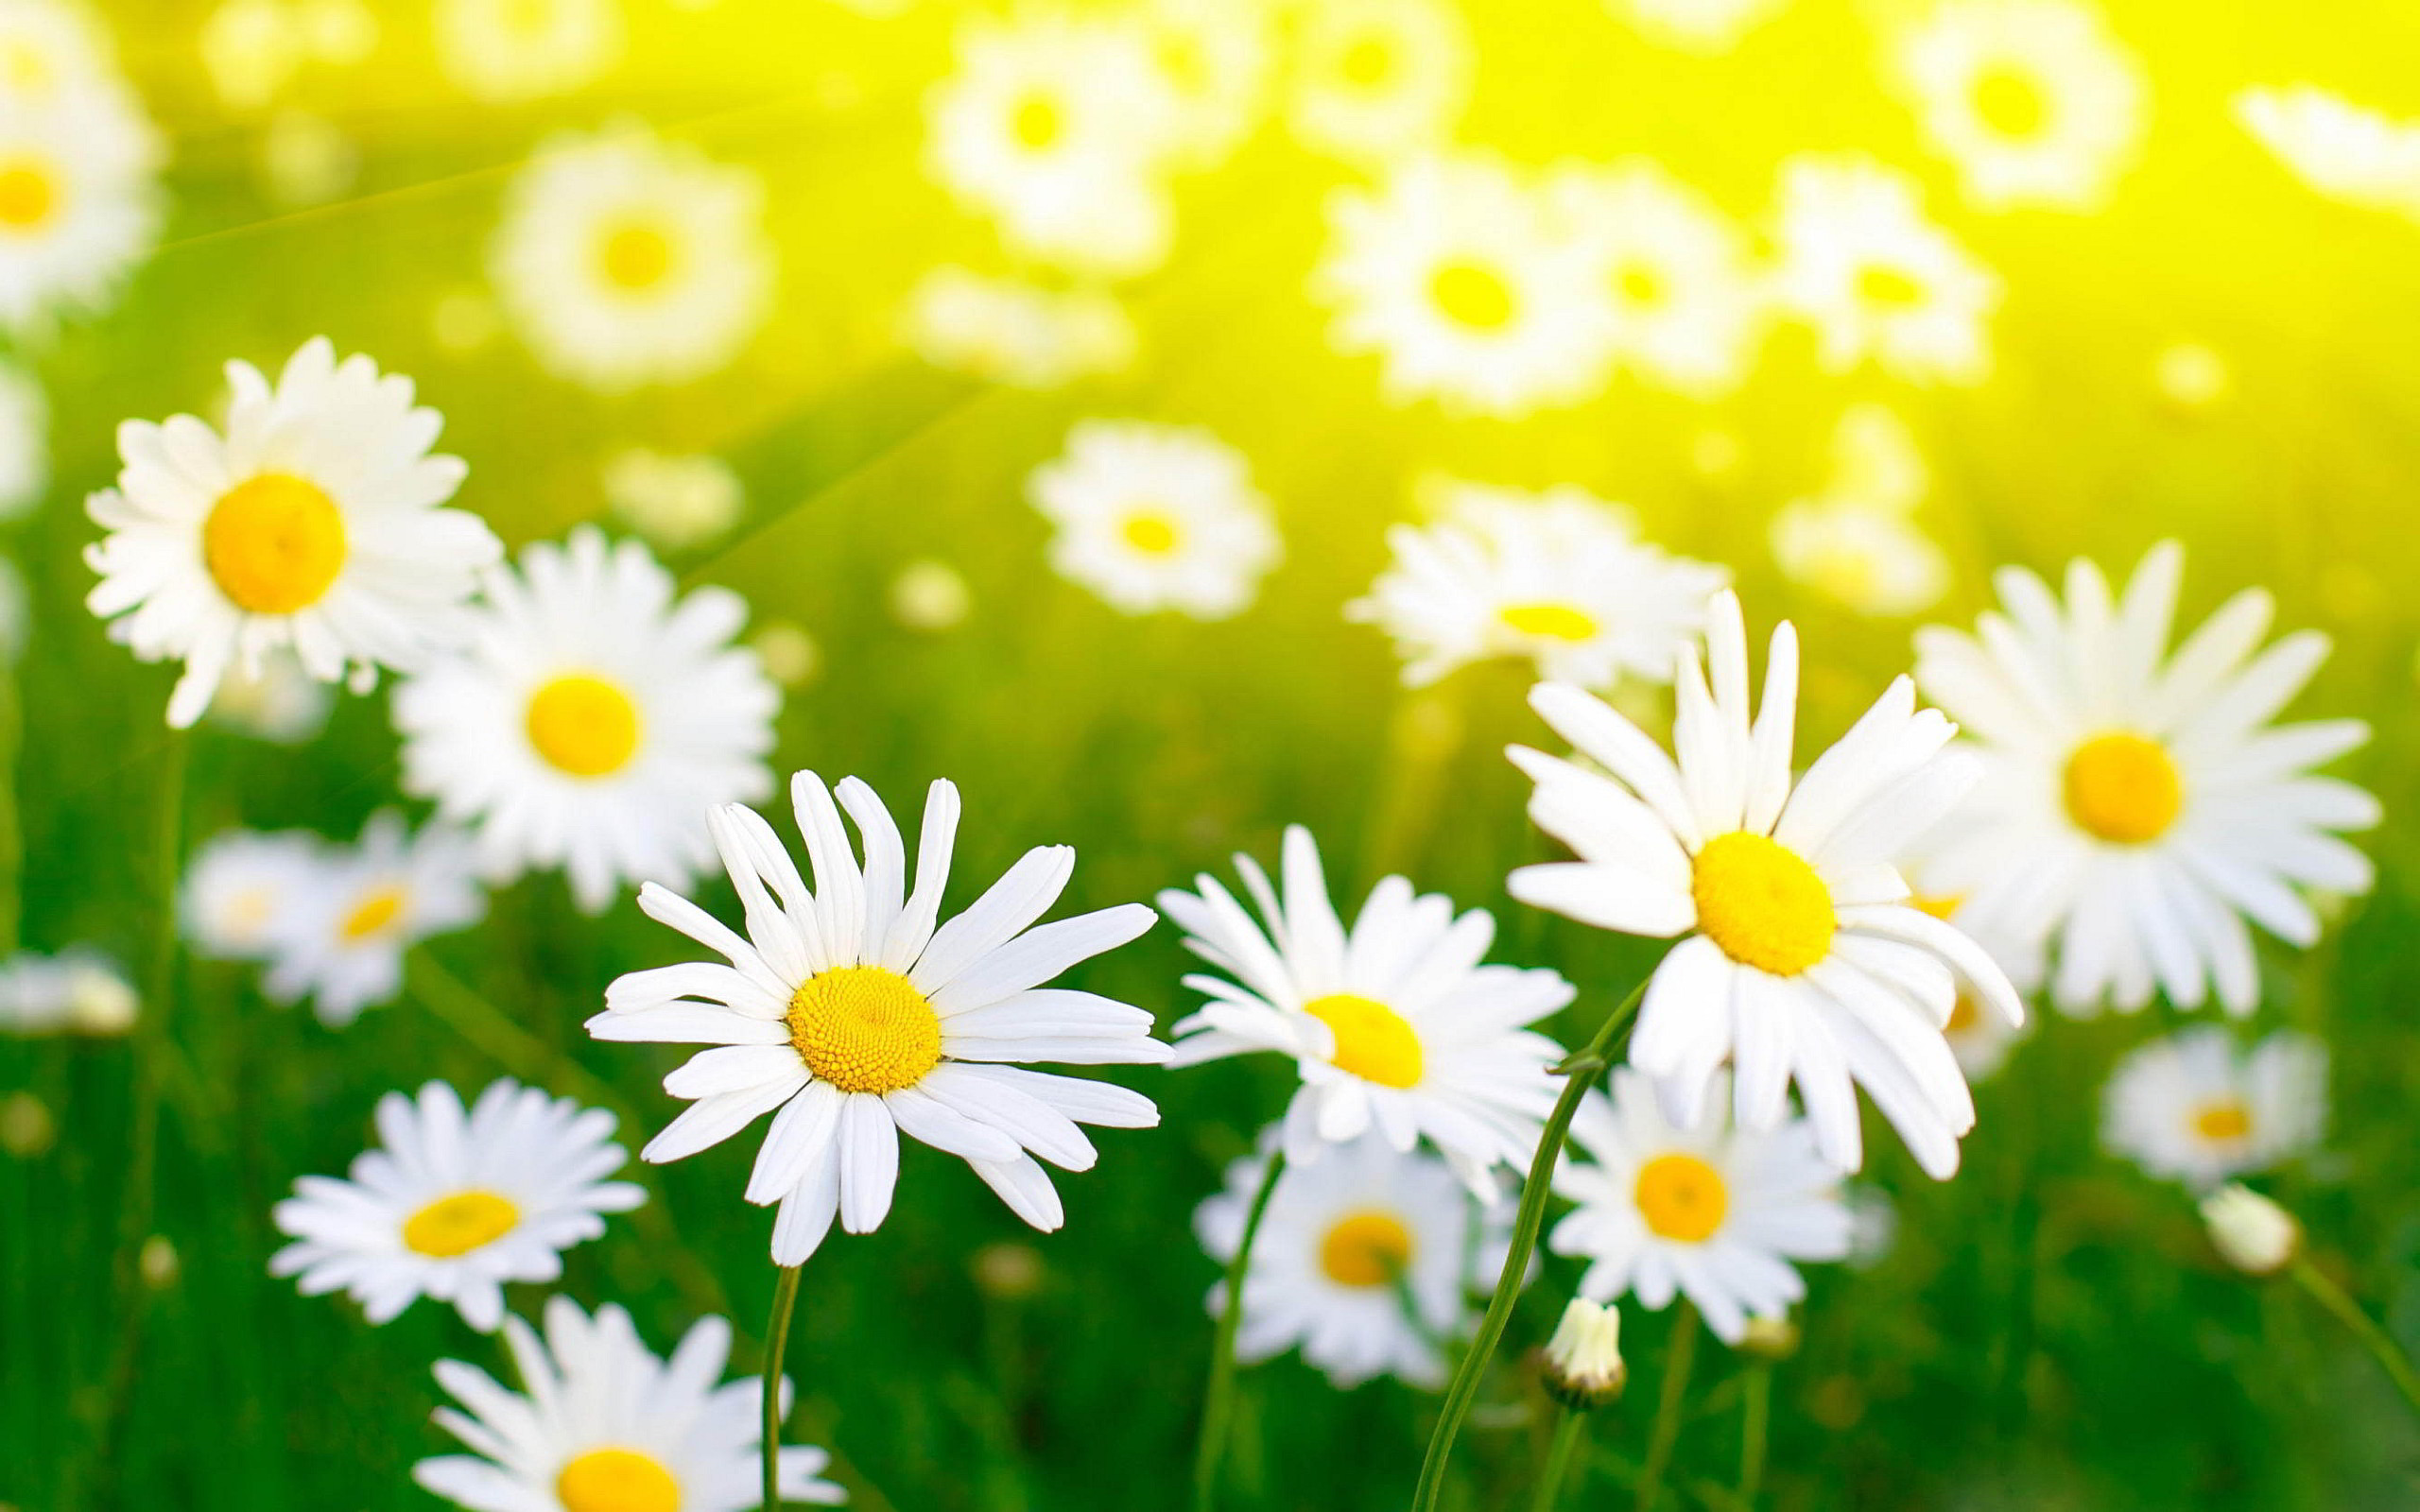 Daisy wallpapers hd desktop backgrounds images and pictures